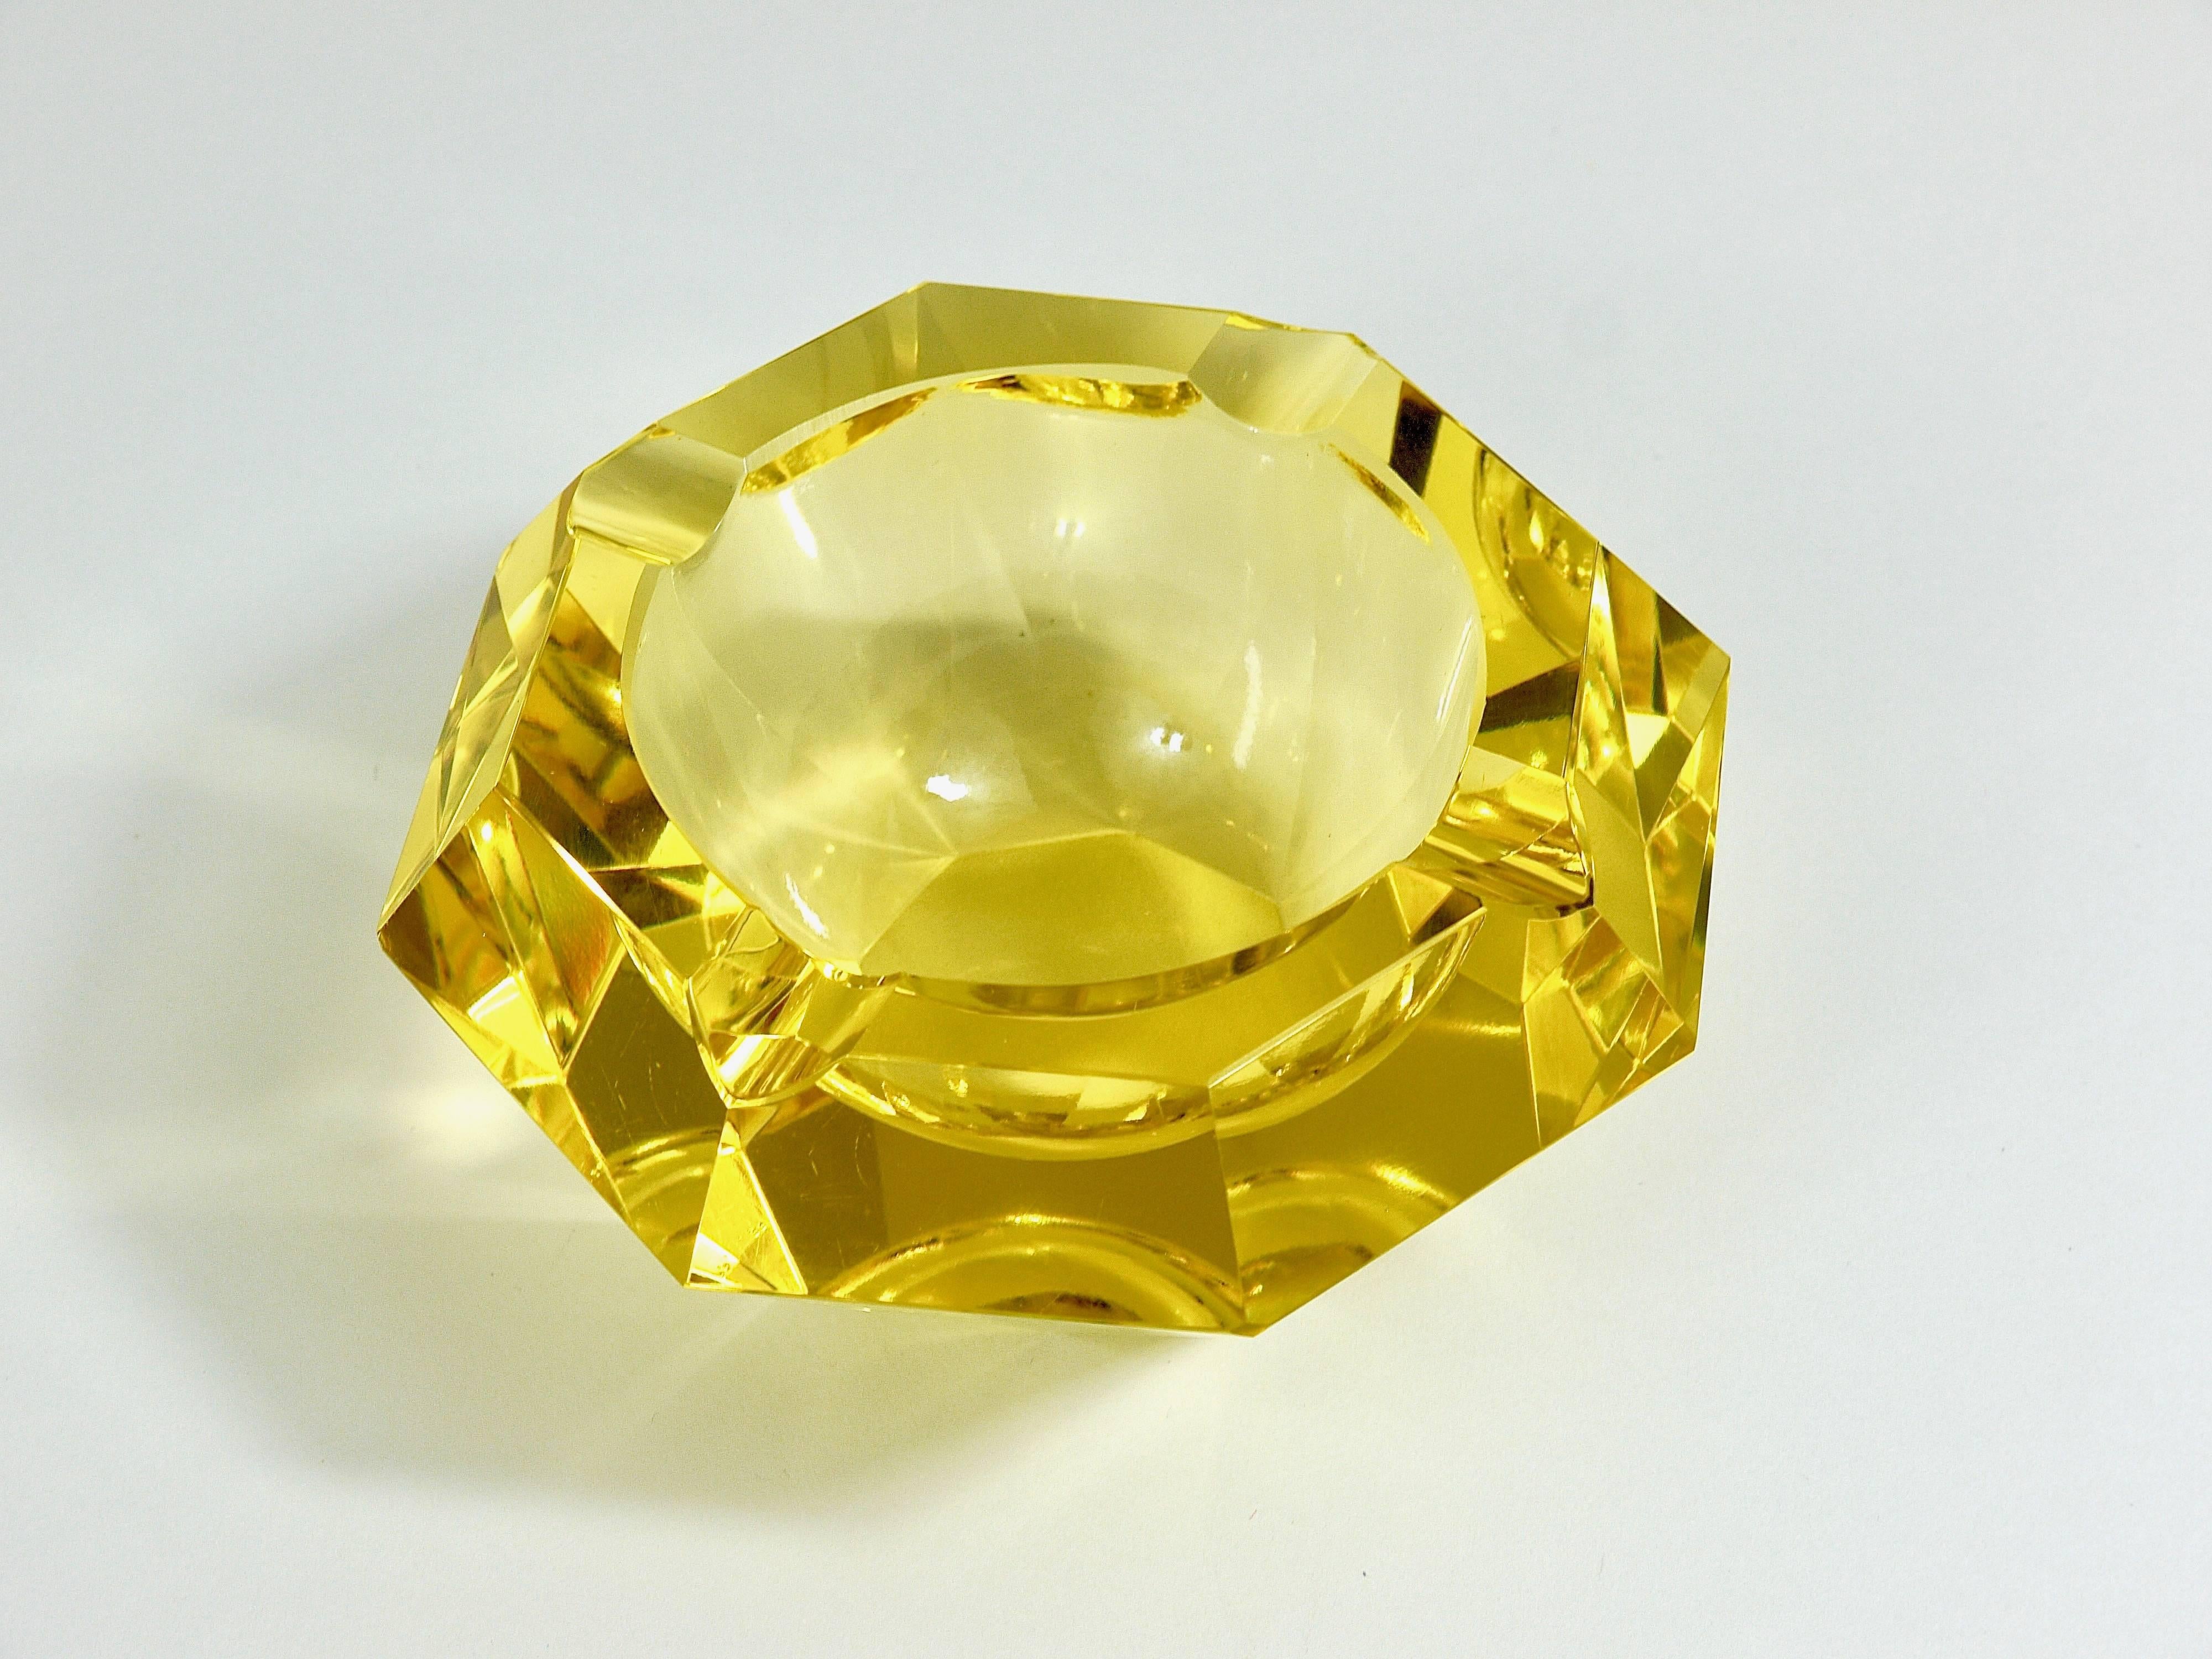 1930s Lemon Faceted Diamond Ashtray in Excellent Condition, Murano, Italy 2